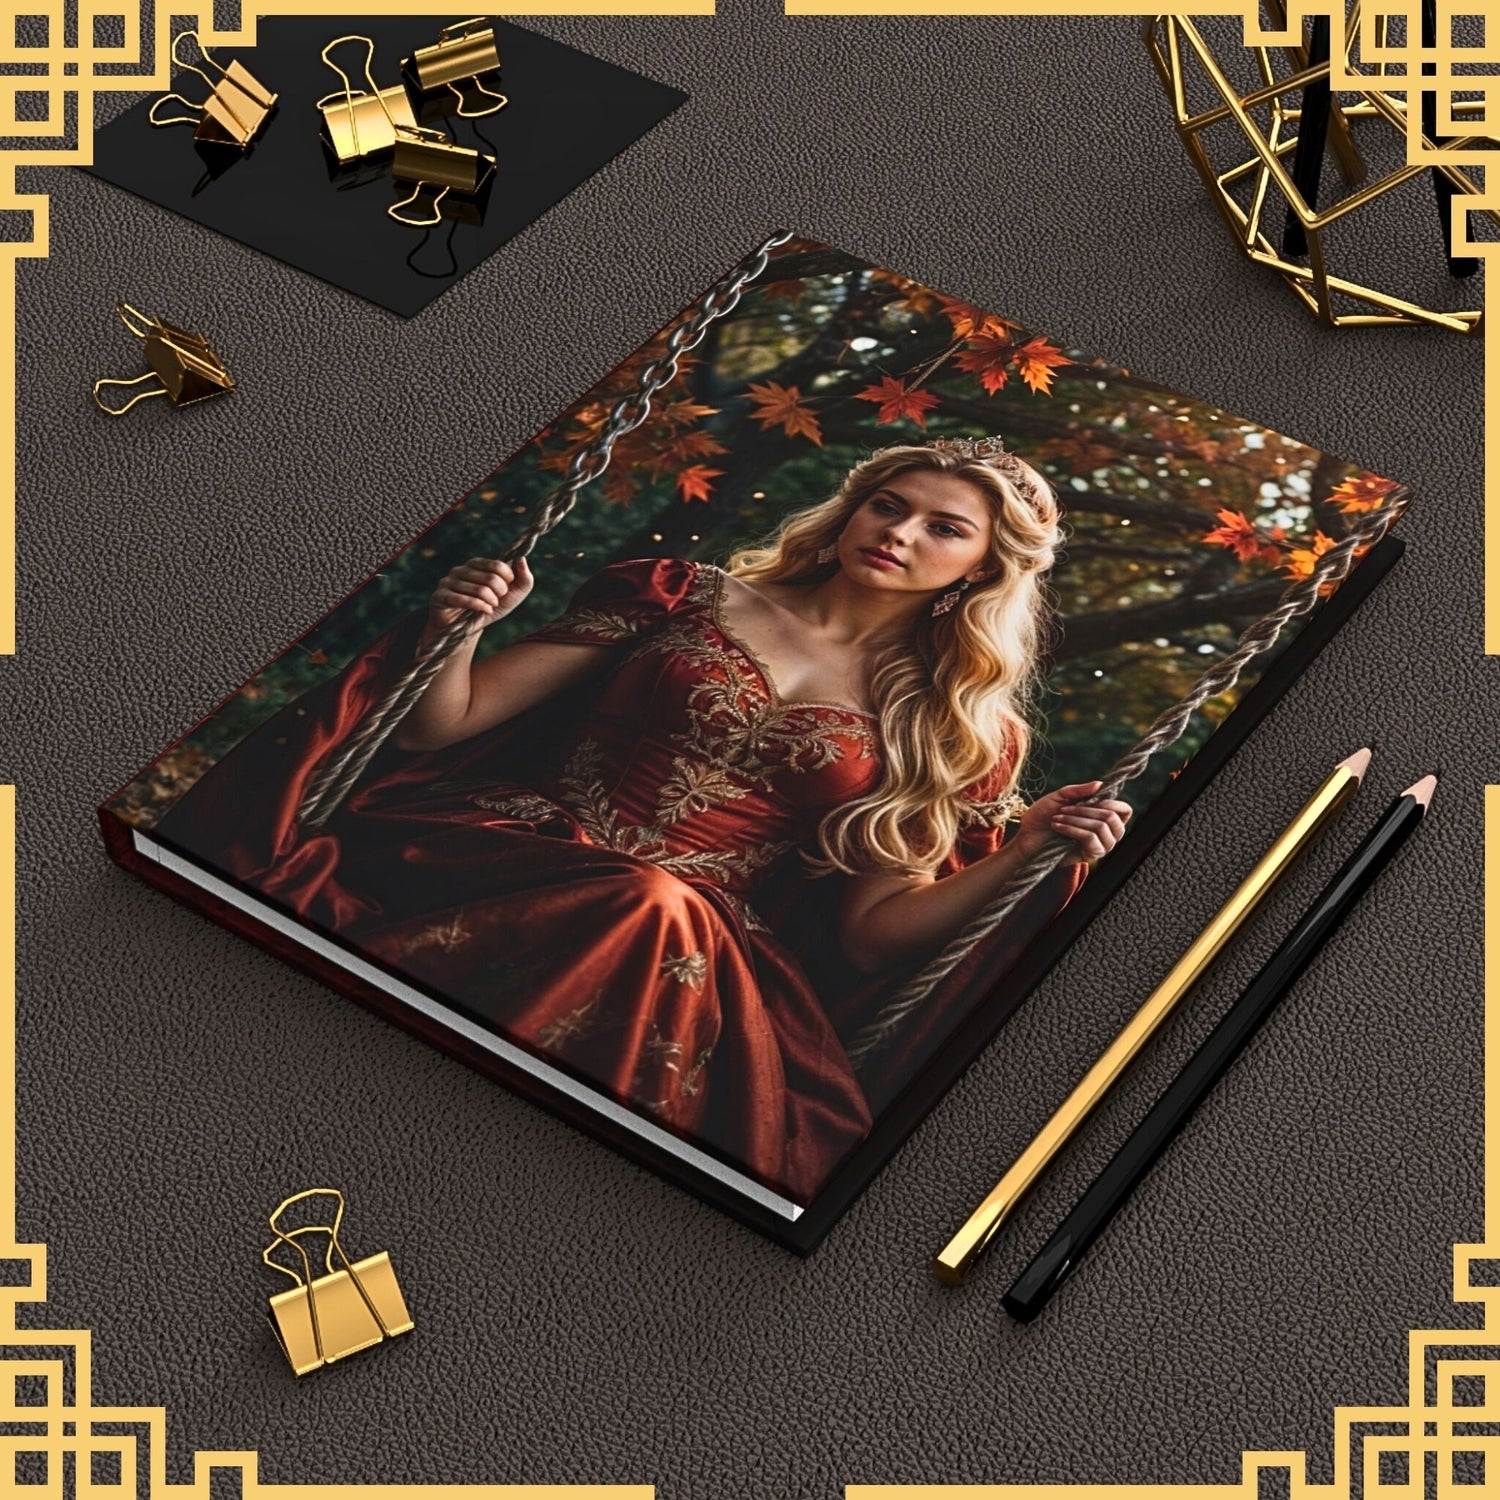 Find the best Journal, Customized and Personalized, for Her – whether as a Romantic Gift for Wife, Mum, or Grandmum. Explore our range including Royal Journal, Renaissance Female Journal, and more. Shop now!